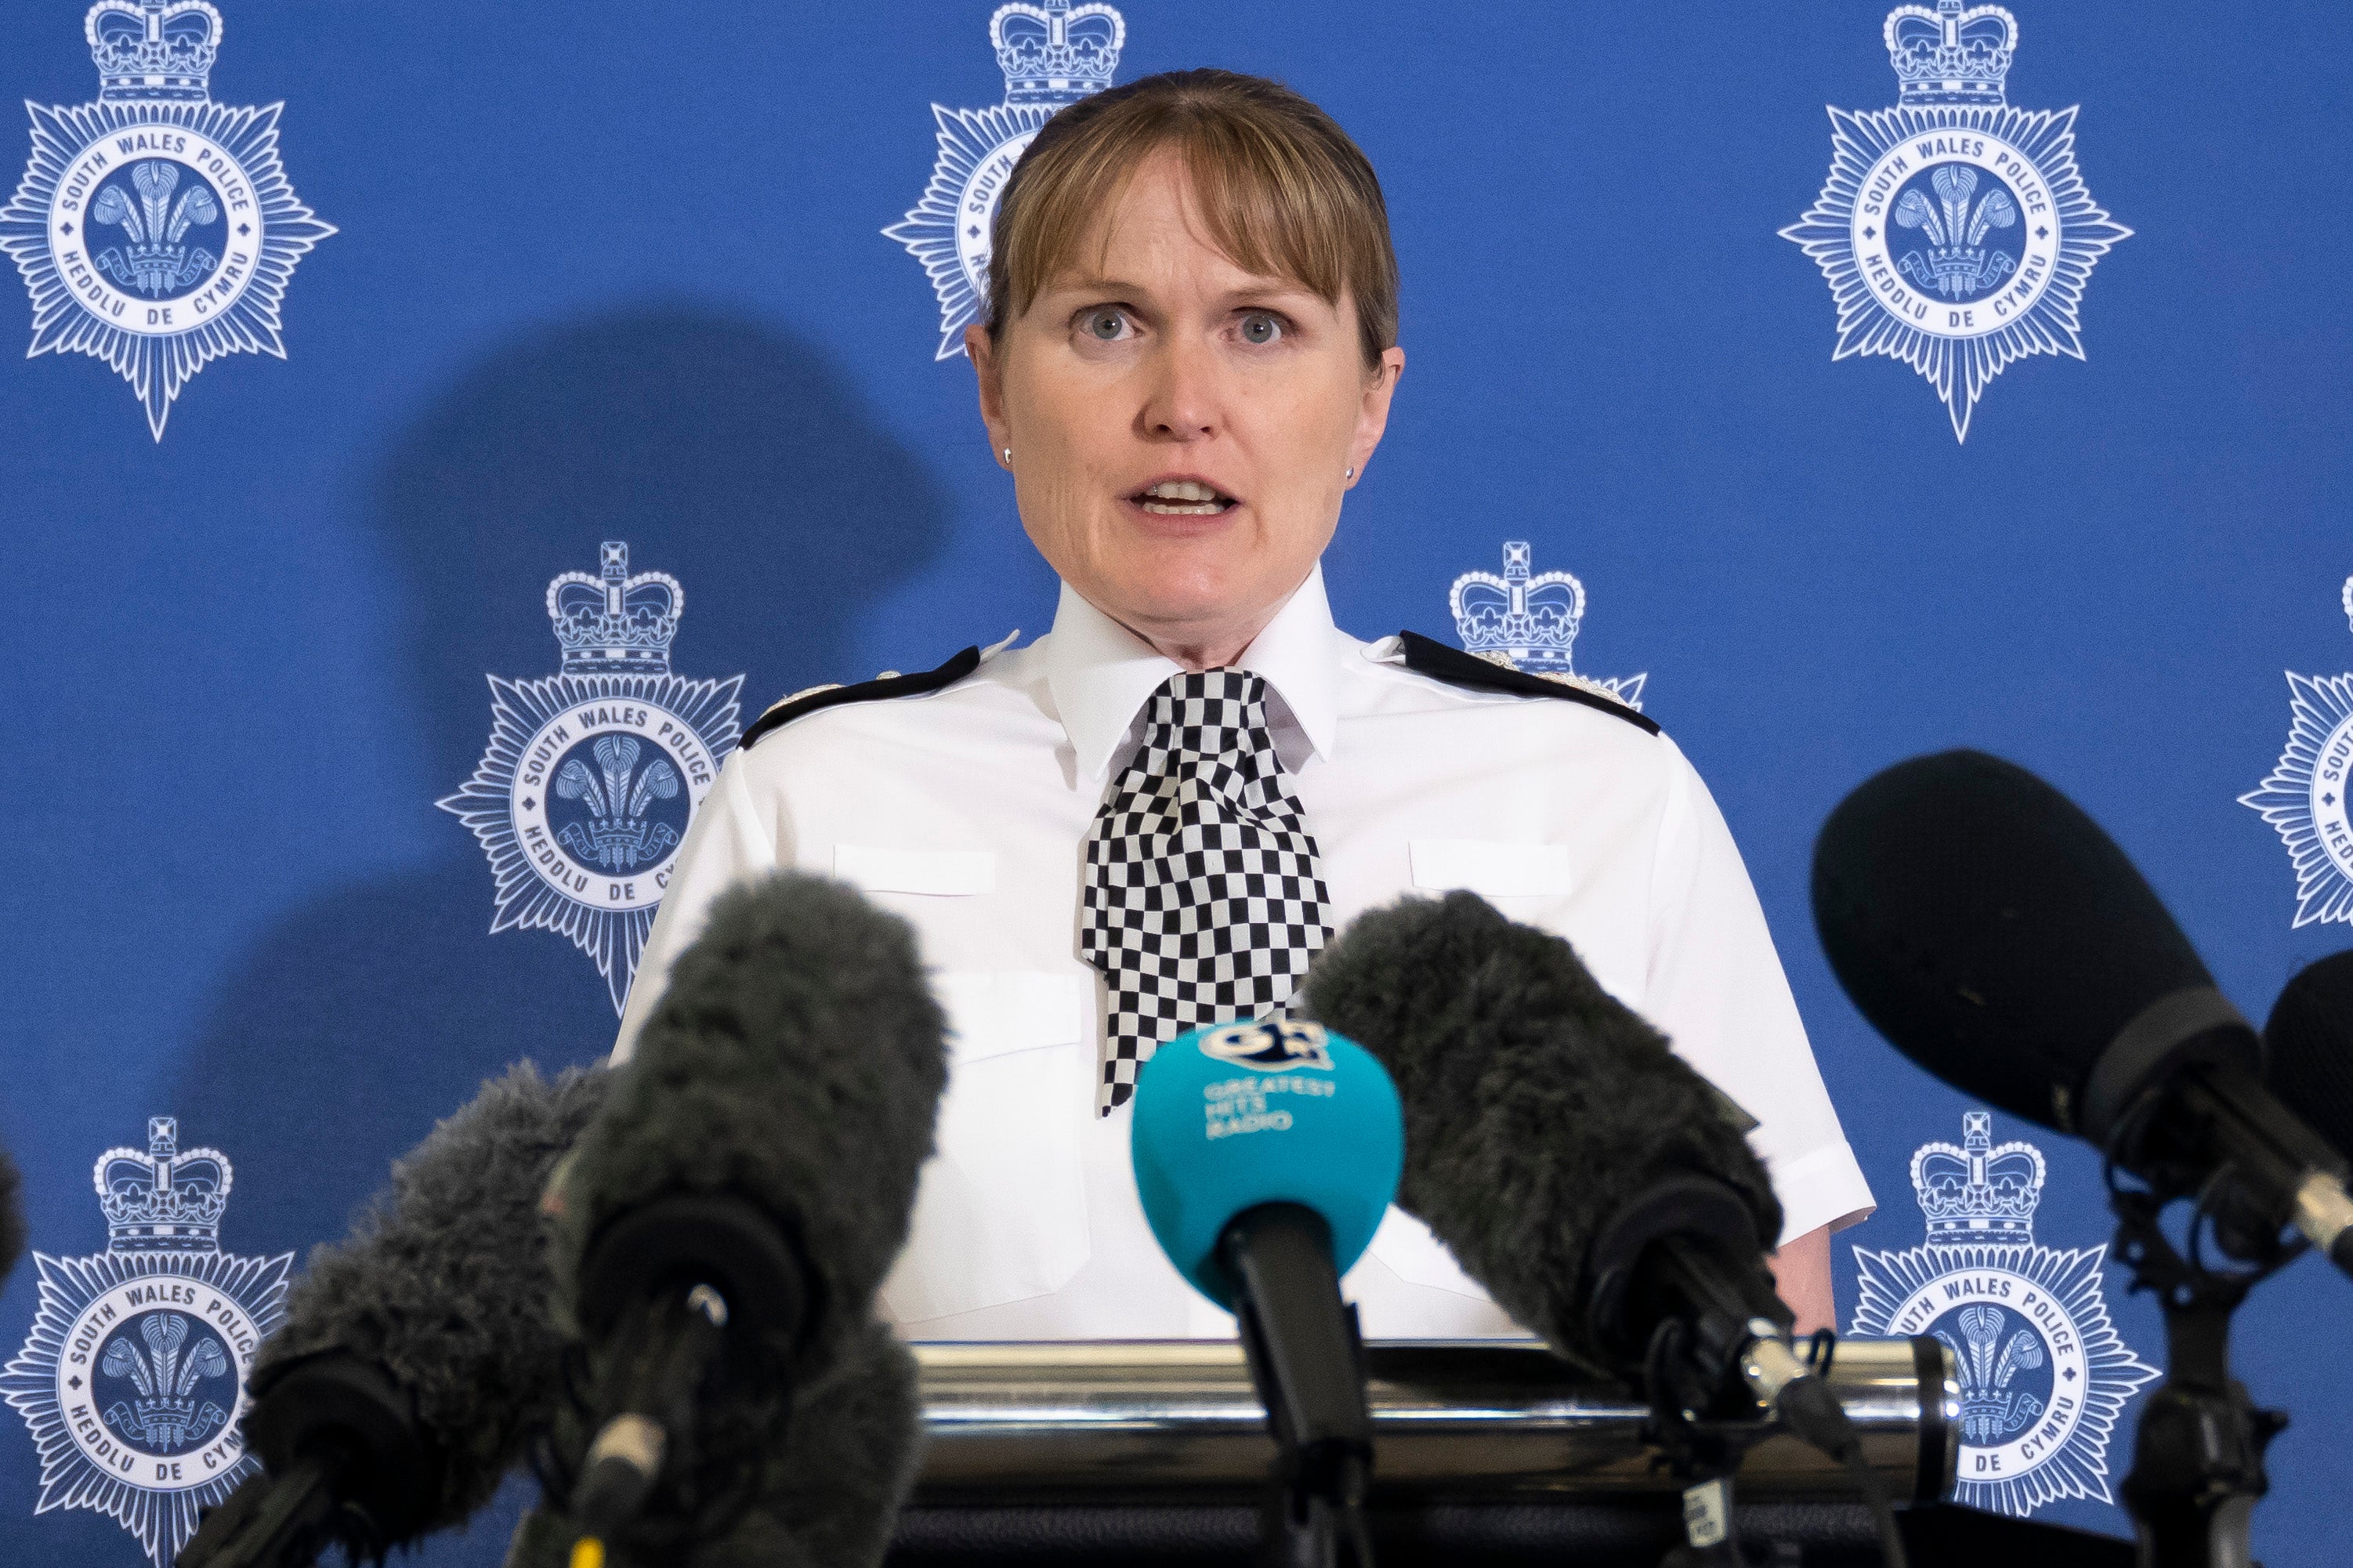 Deputy Chief Constable Rachel Bacon gives a press conference on the crash in Cardiff